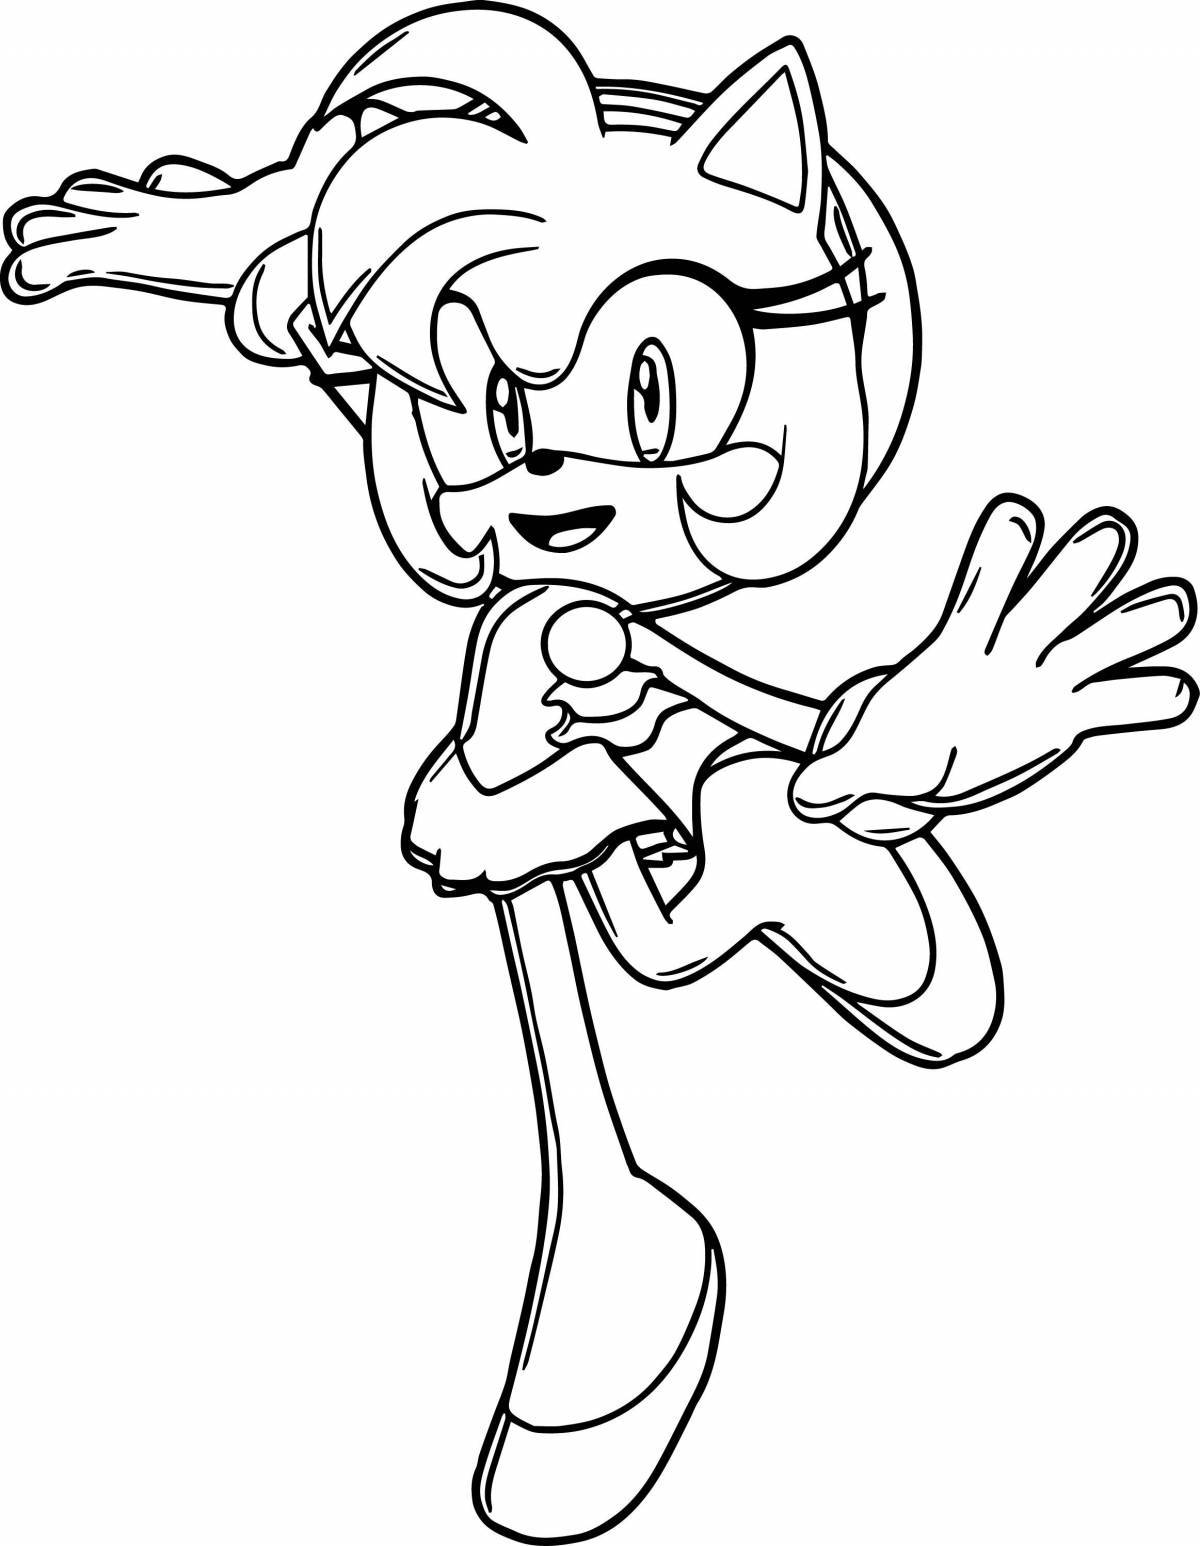 Playful amy rose coloring page